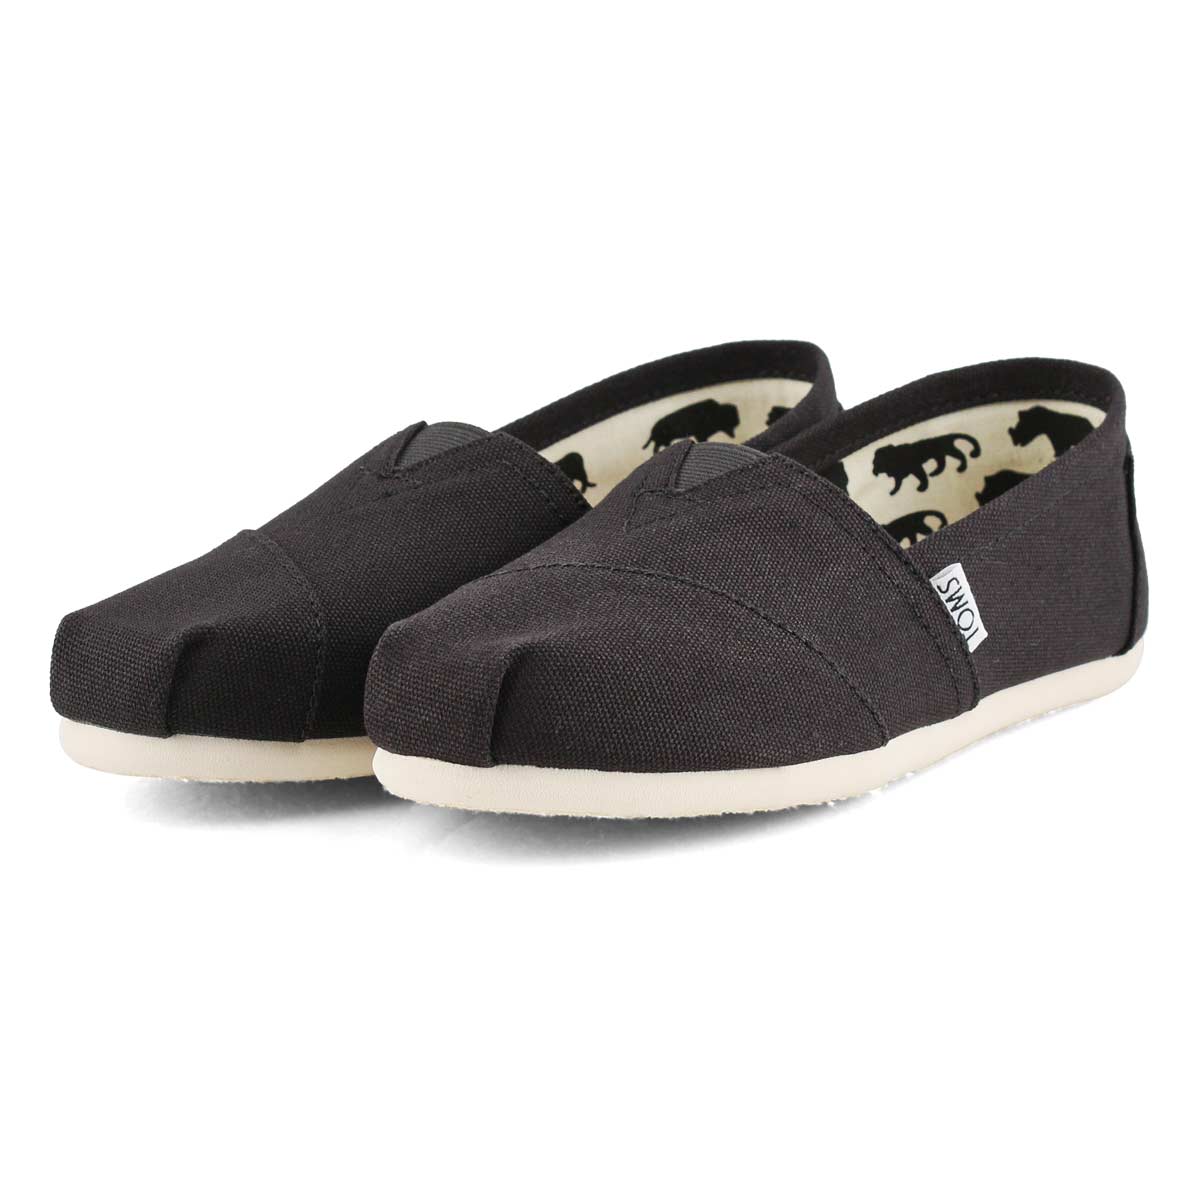 TOMS Men's Classic Casual Loafer - Black | SoftMoc.com